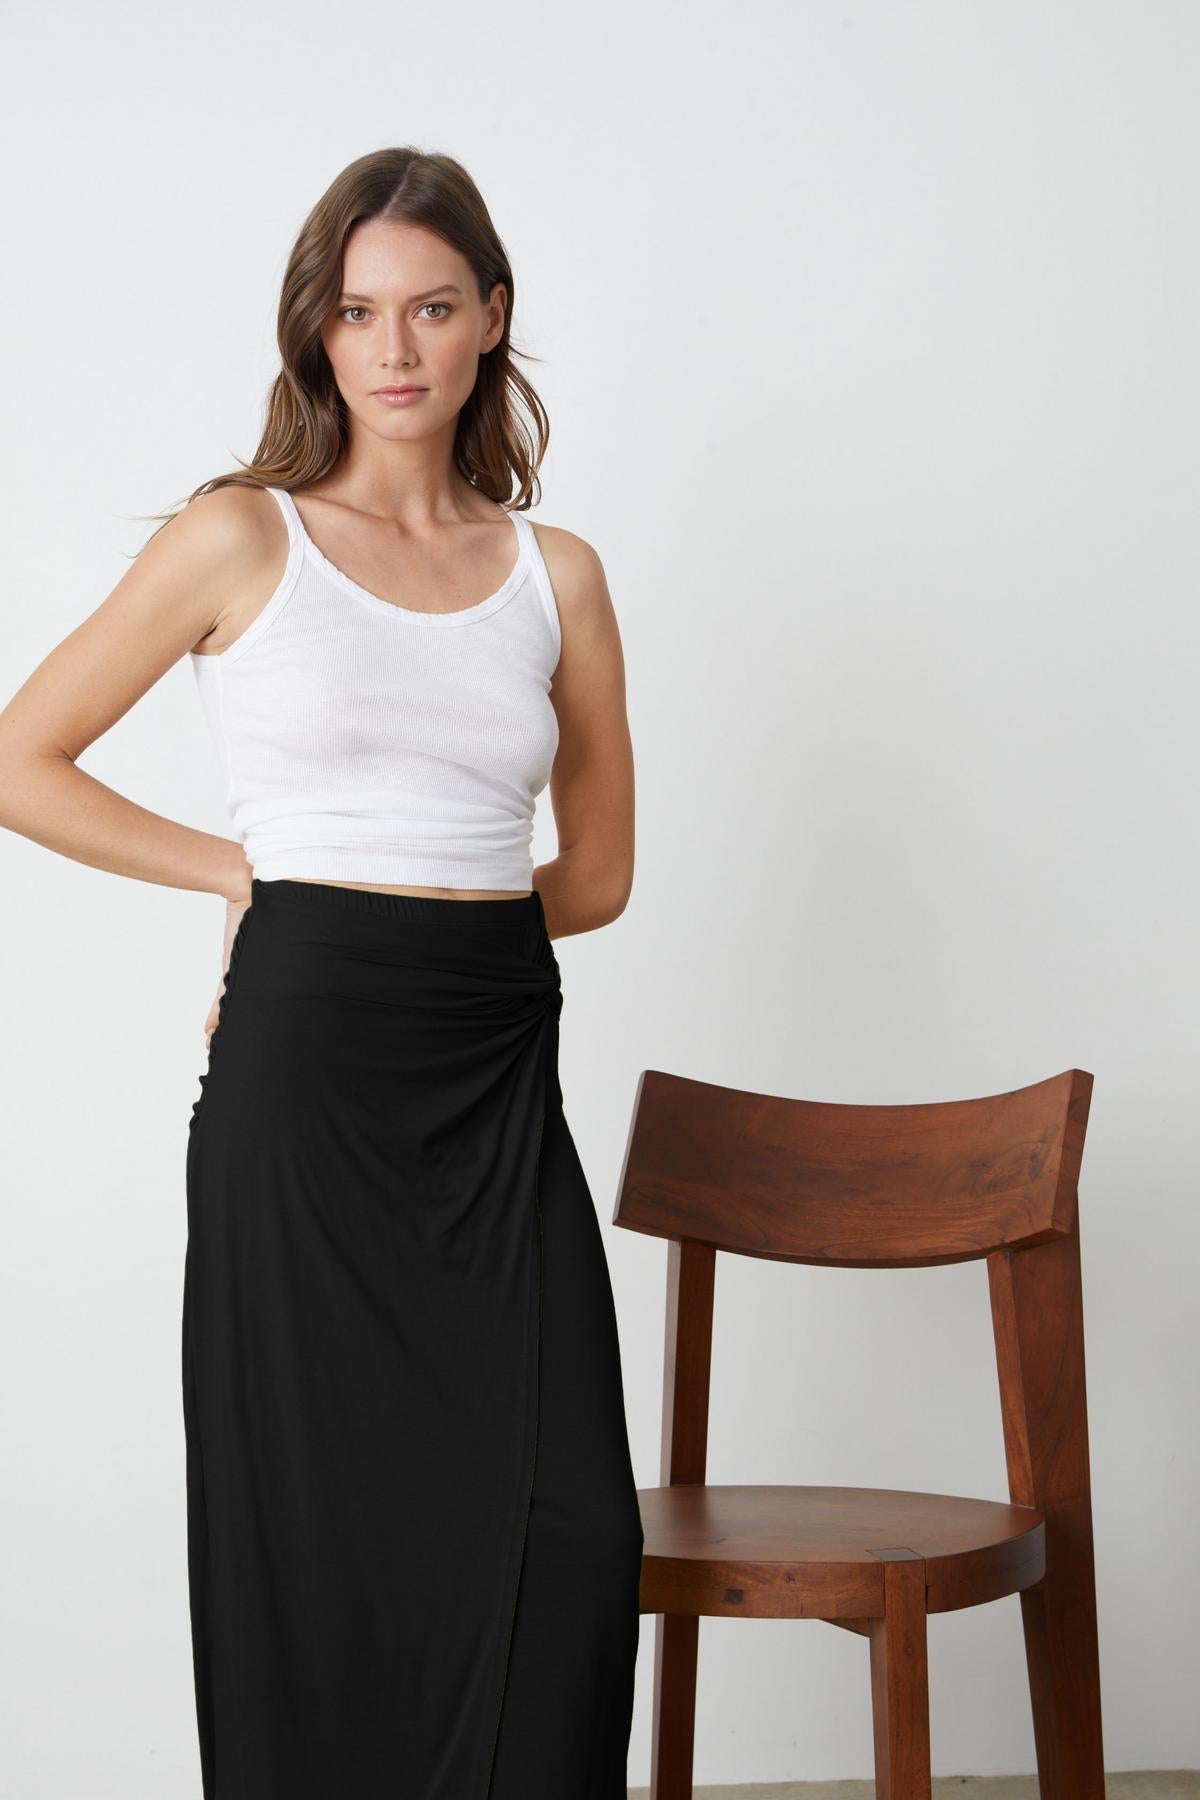   A person wearing a SHAE TWIST FRONT SKIRT by Velvet by Graham & Spencer and white top. 